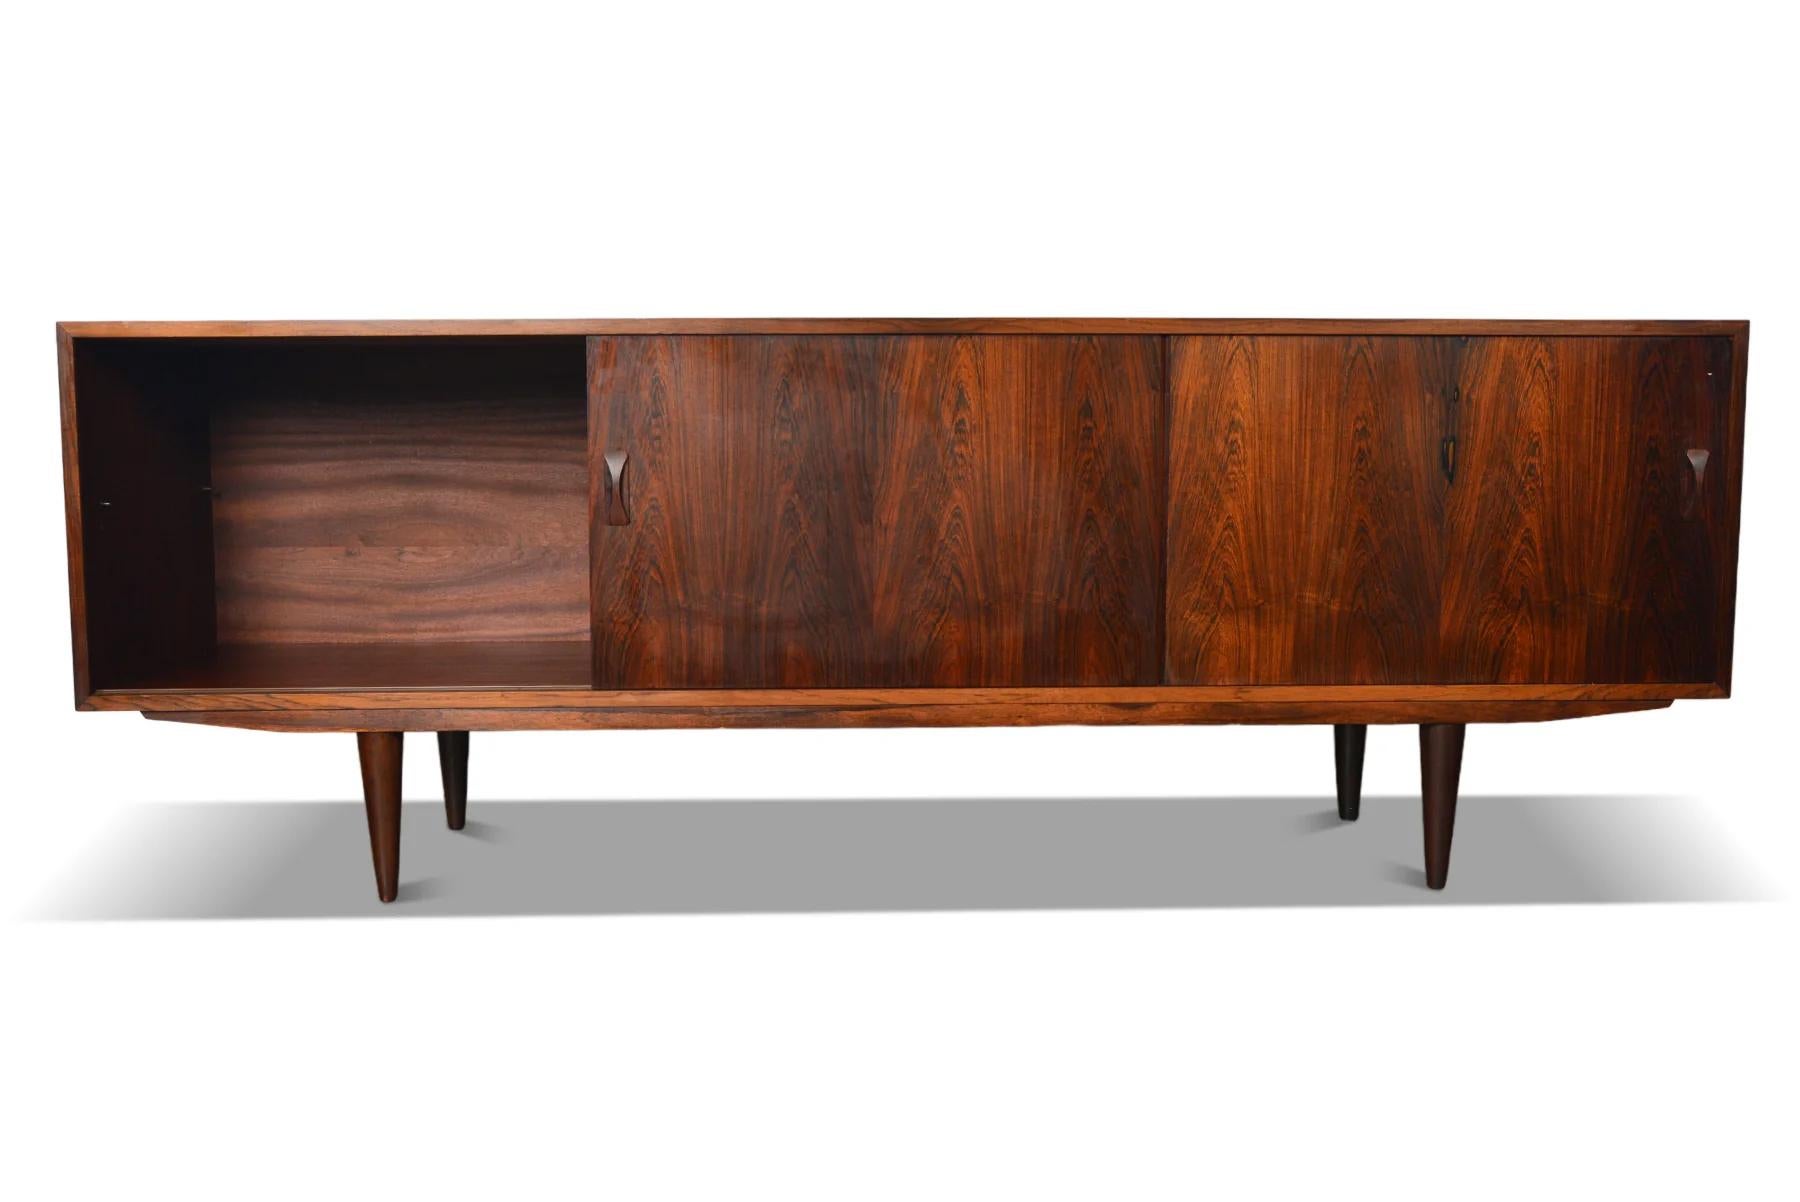 Origin: Denmark
Designer: Unknown
Manufacturer: Clausen & Søn
Era: 1960s
Materials: Rosewood
Measurements: 82″ wide x 17.5″ deep x 29″ tall

Condition: In excellent original condition with typical wear for its vintage. Price includes restoration /